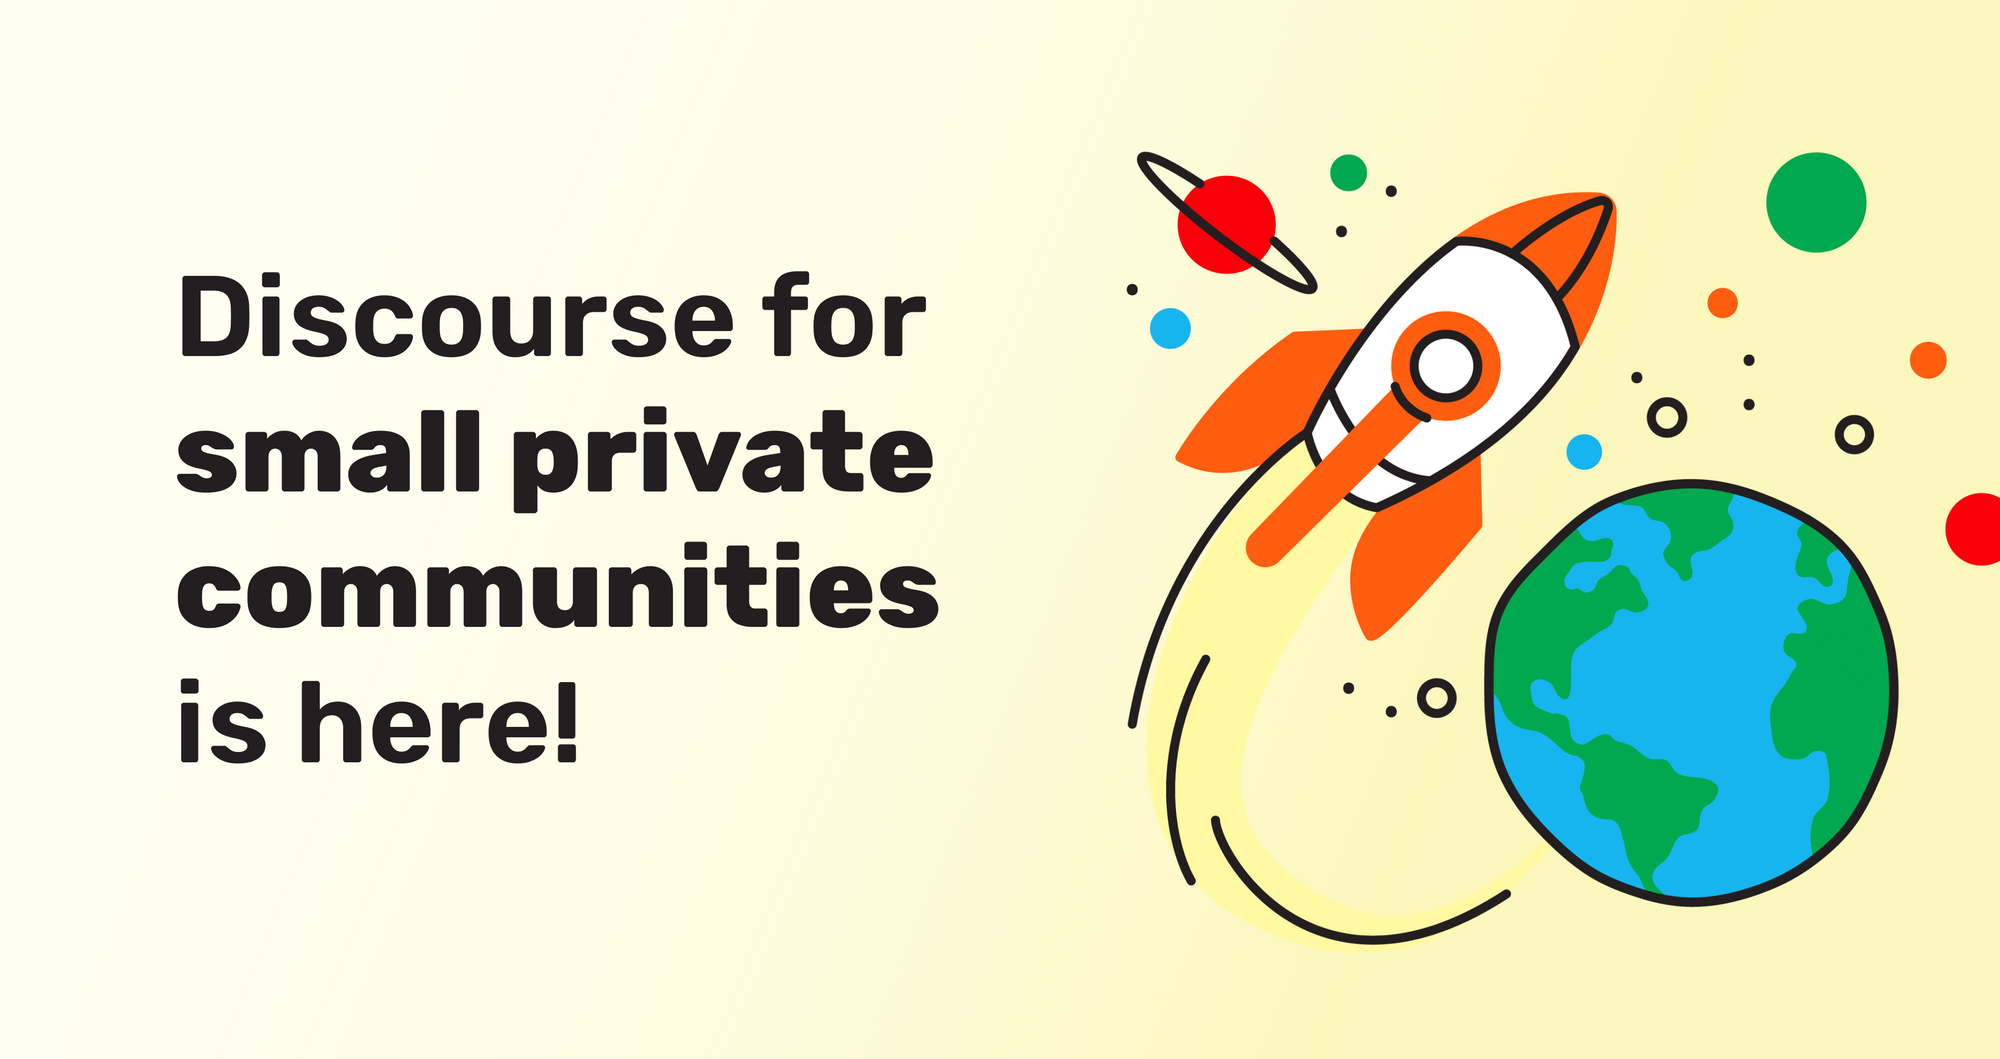 Discourse for small private communities is here!